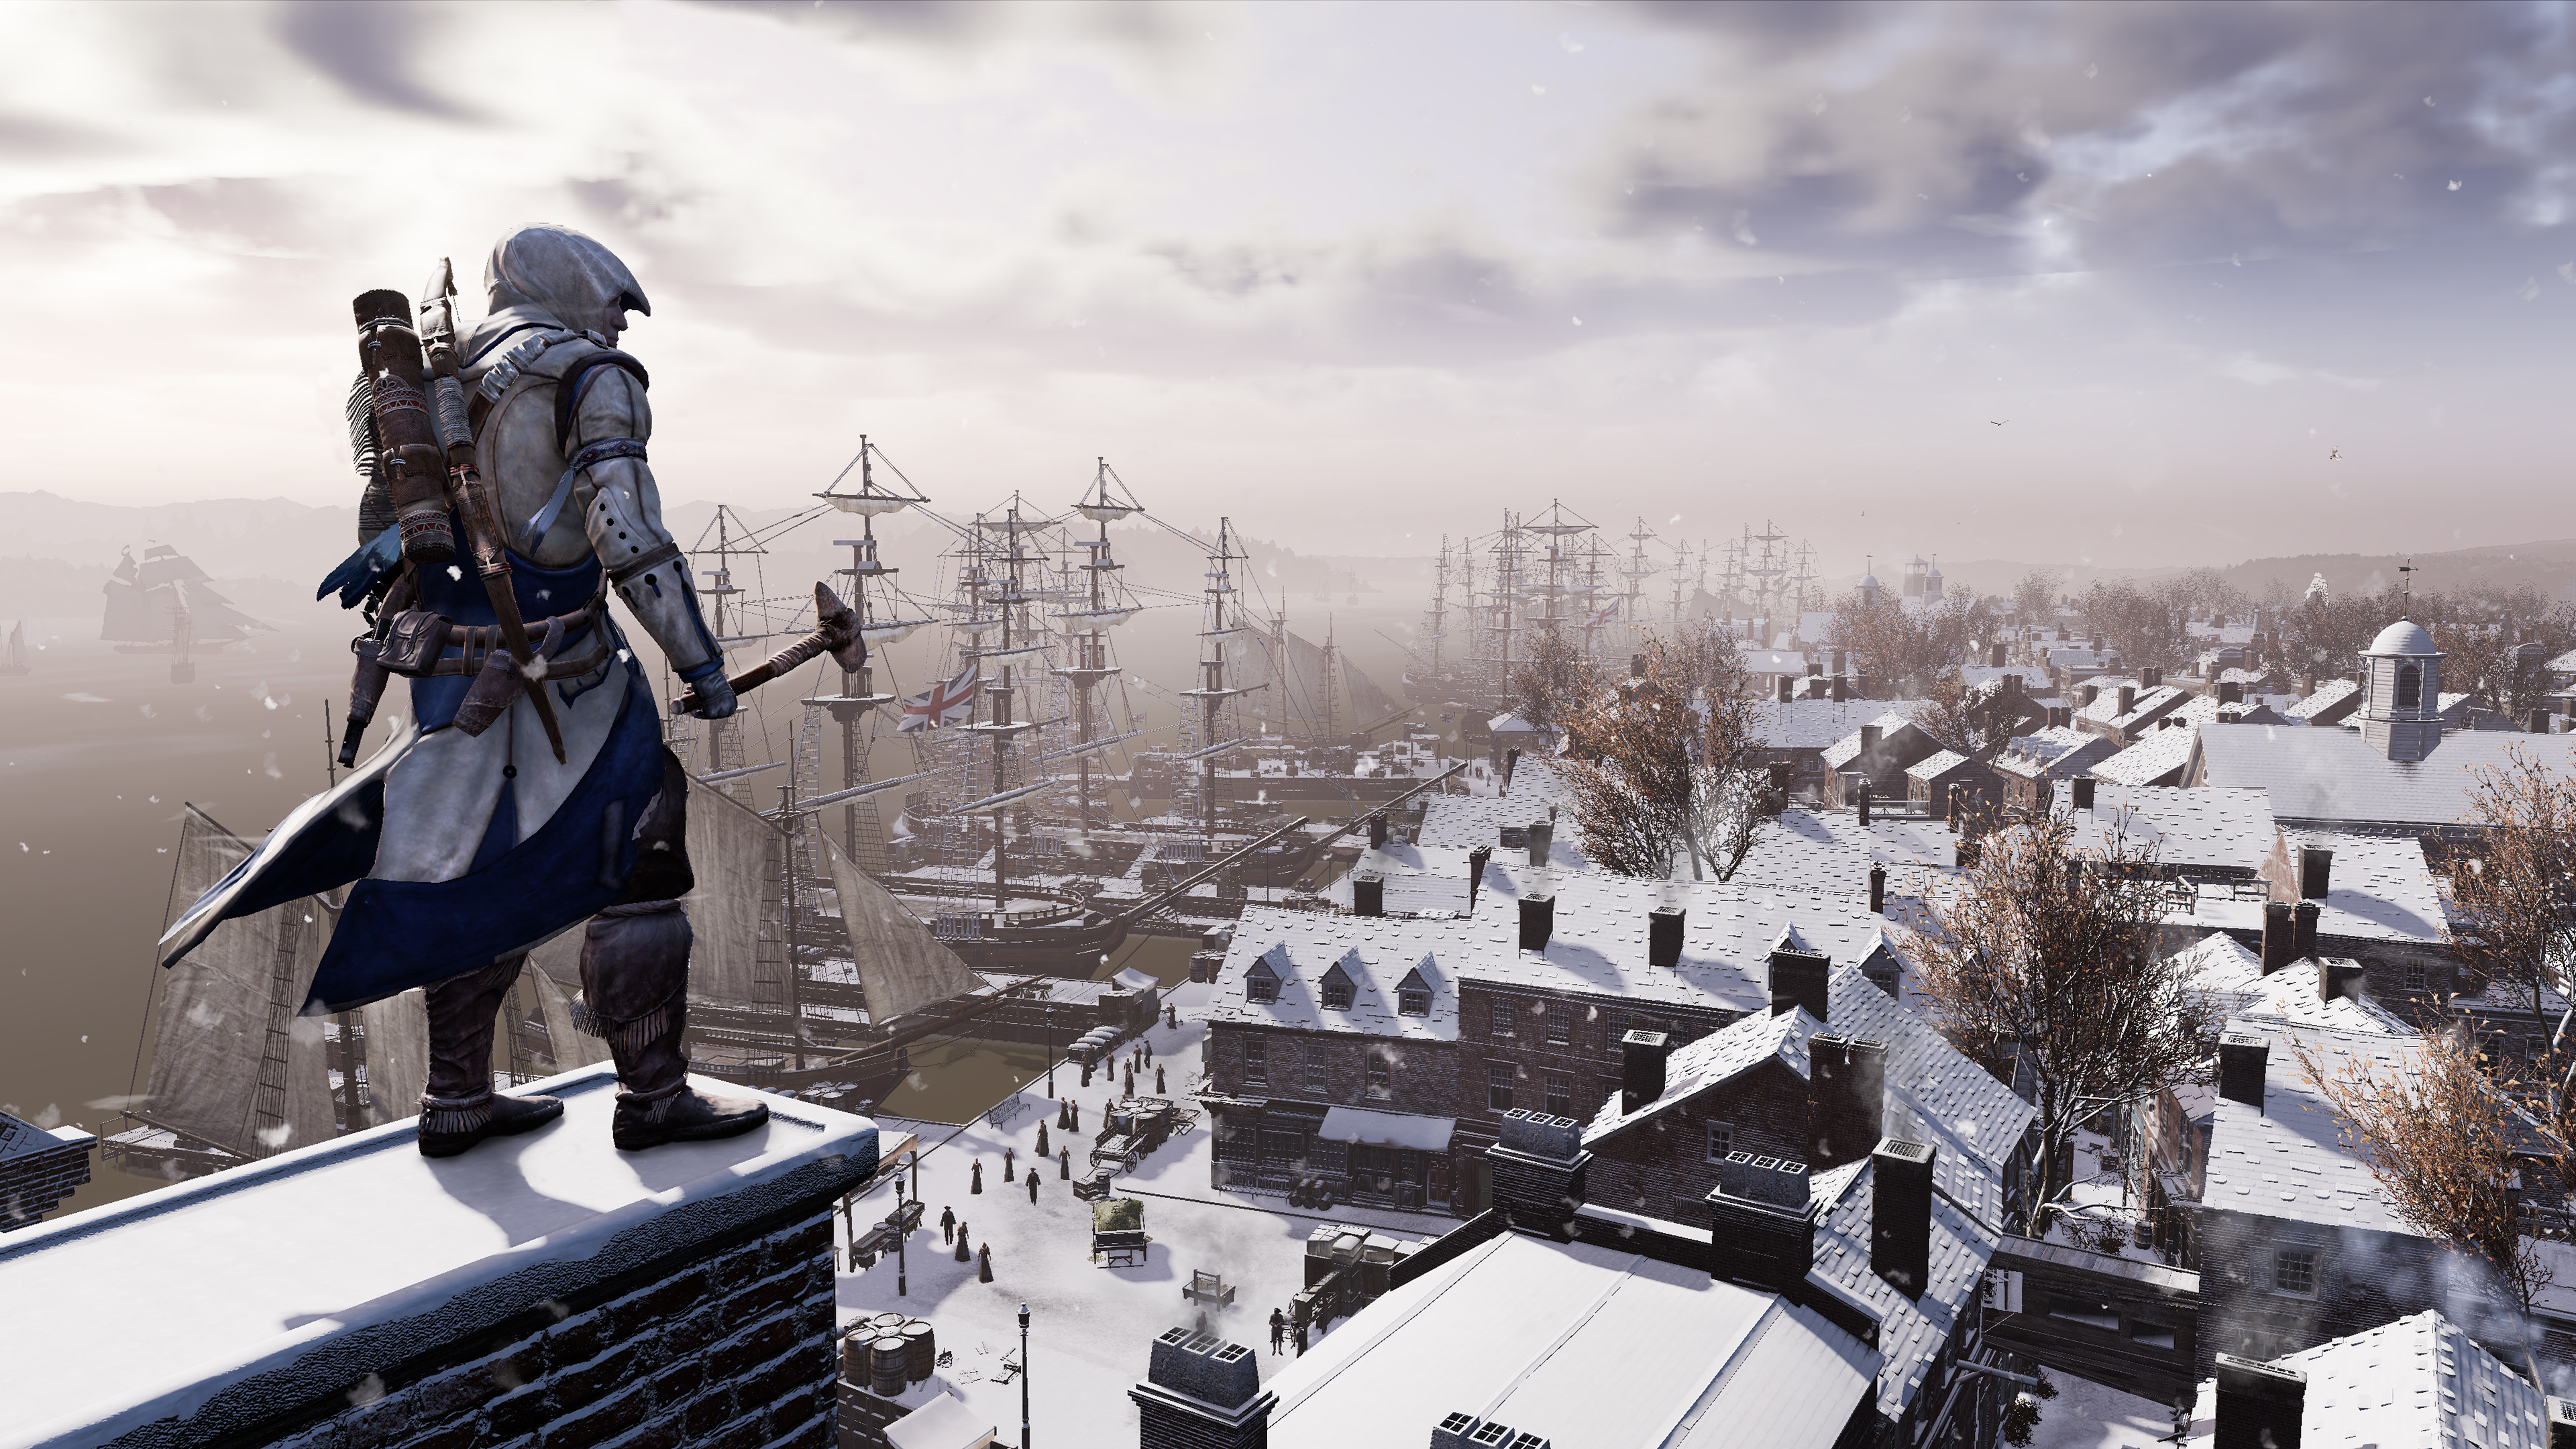 Creed III Review A Franchise Finds New Fertile Ground  The New York Times